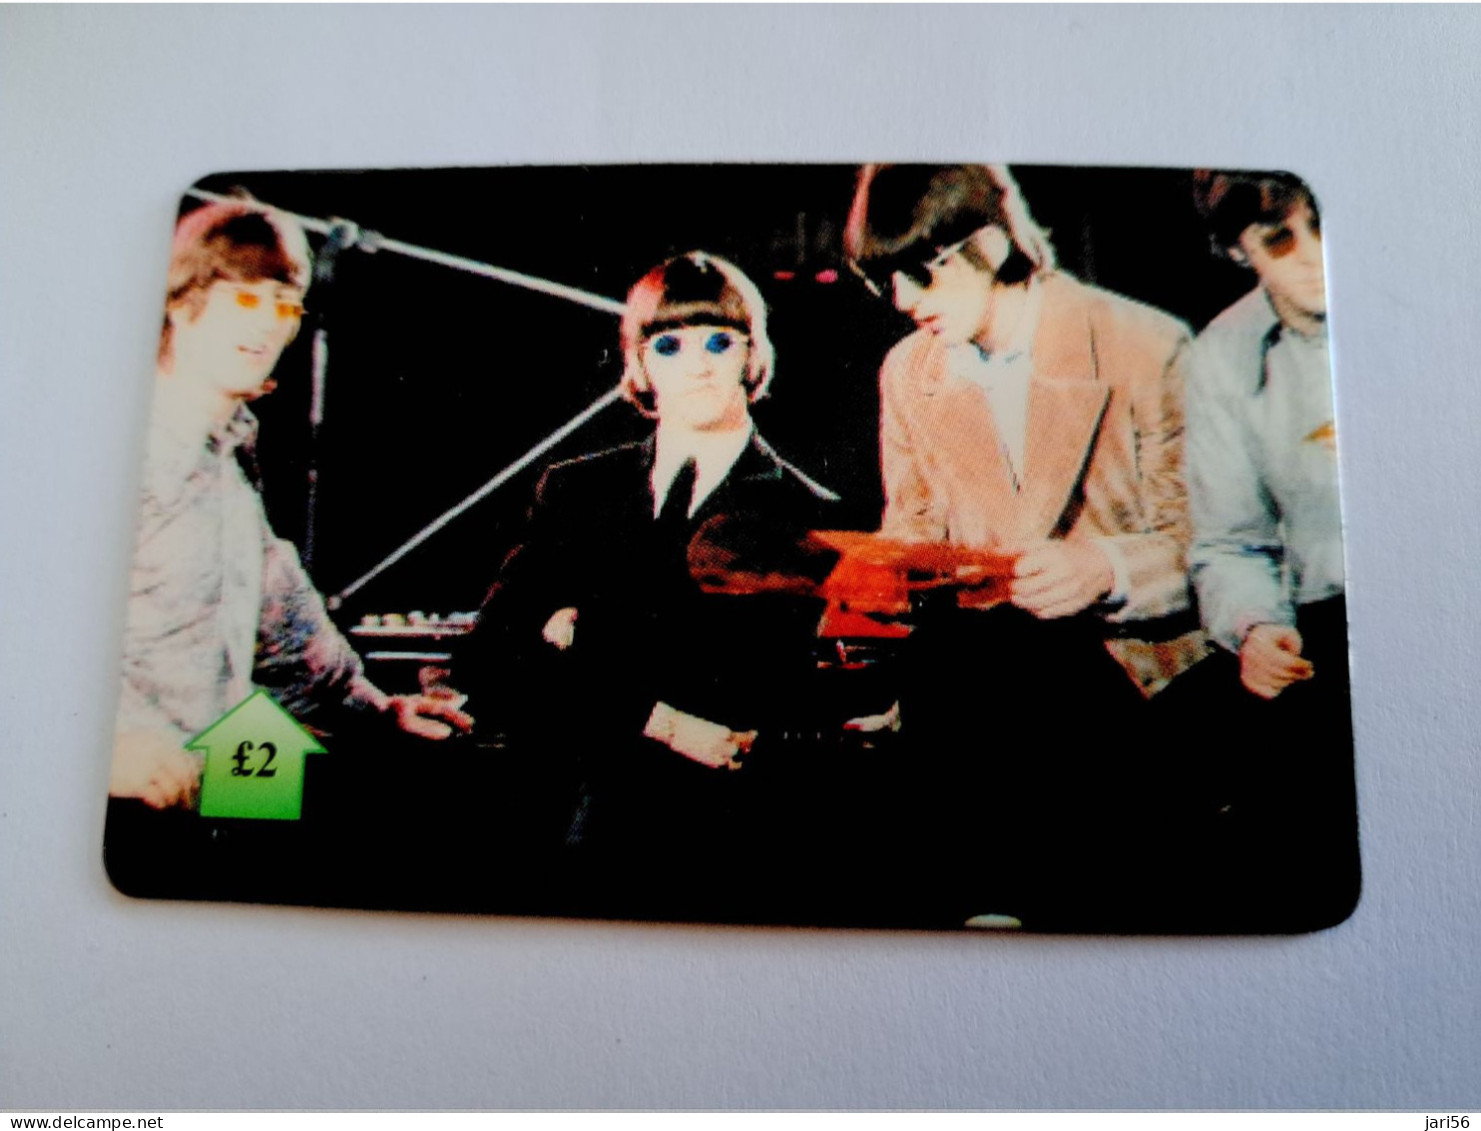 GREAT BRITAIN / 2 POUND /MAGSTRIPE  / BEATLES  PHONECARD/ LIMITED EDITION/  ONLY 500 EX     **15686** - Verzamelingen